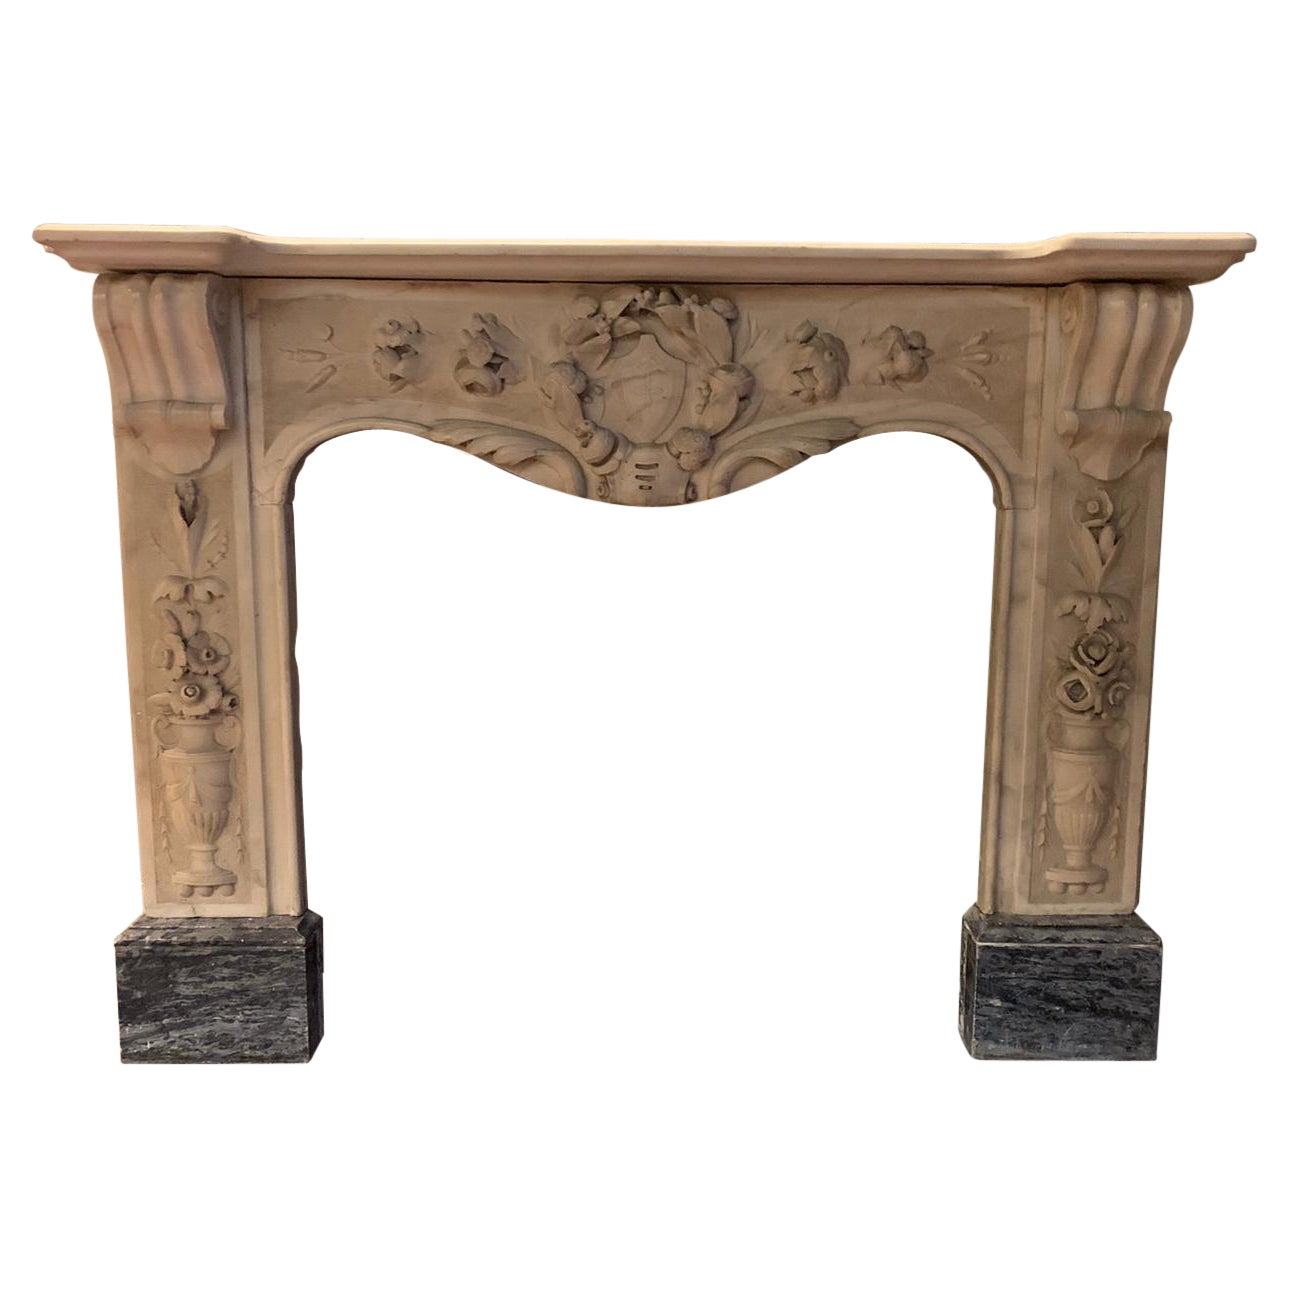 Antique Fireplace Mantle White Carrara Marble, Richly Carved, 19th Century Italy For Sale